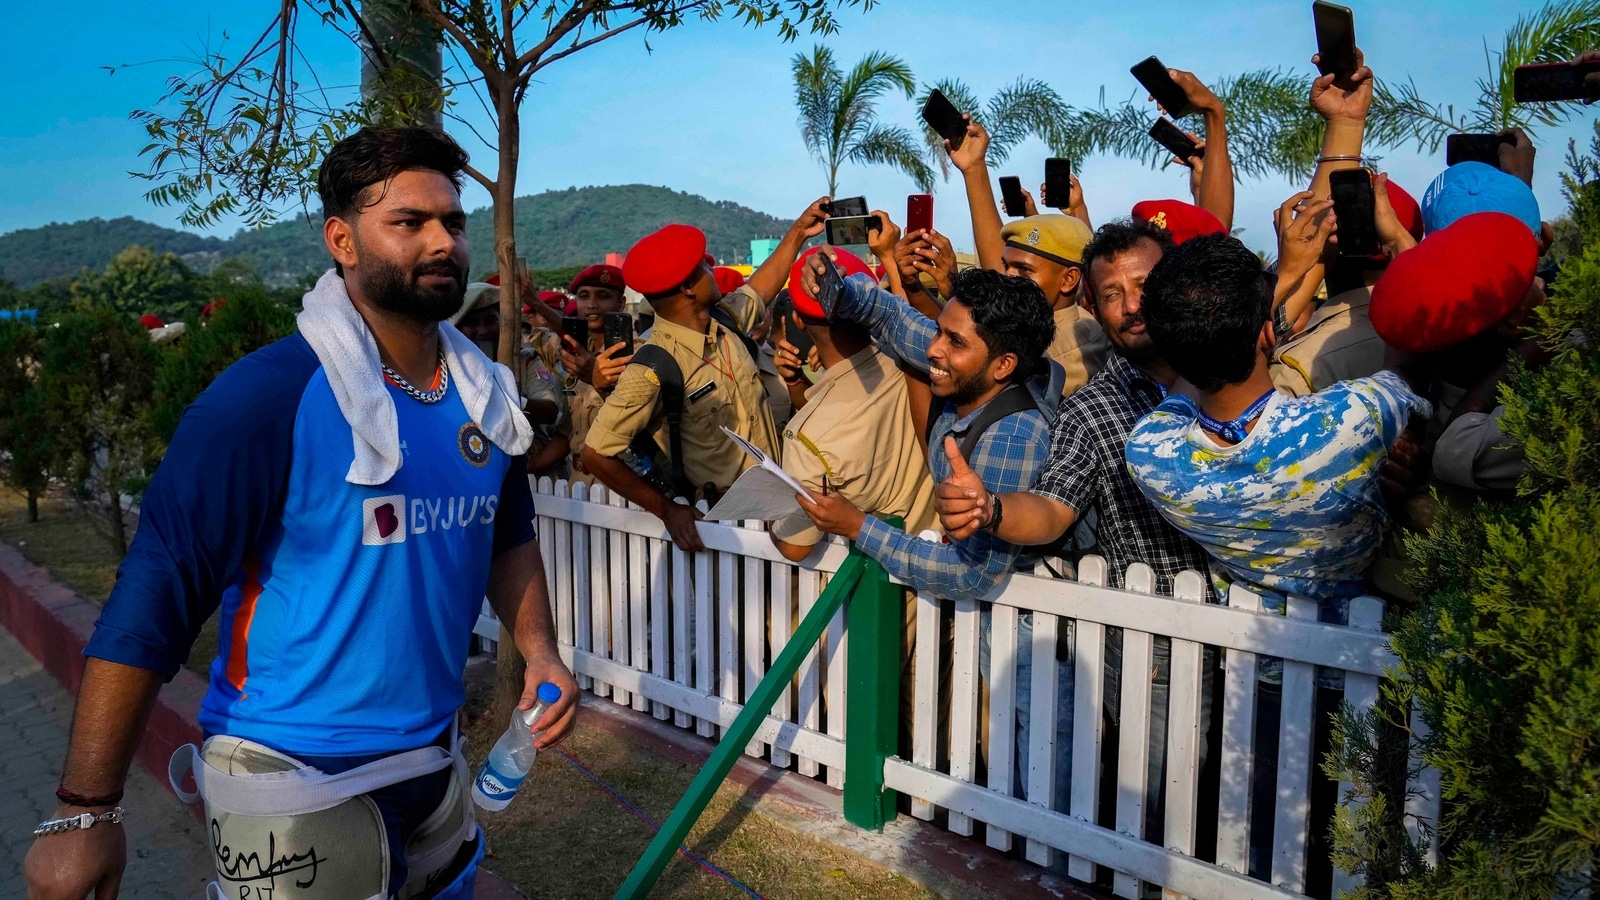 Watch: Rishabh Pant's sweet gesture for fans in Guwahati is winning the  internet | Cricket - Hindustan Times